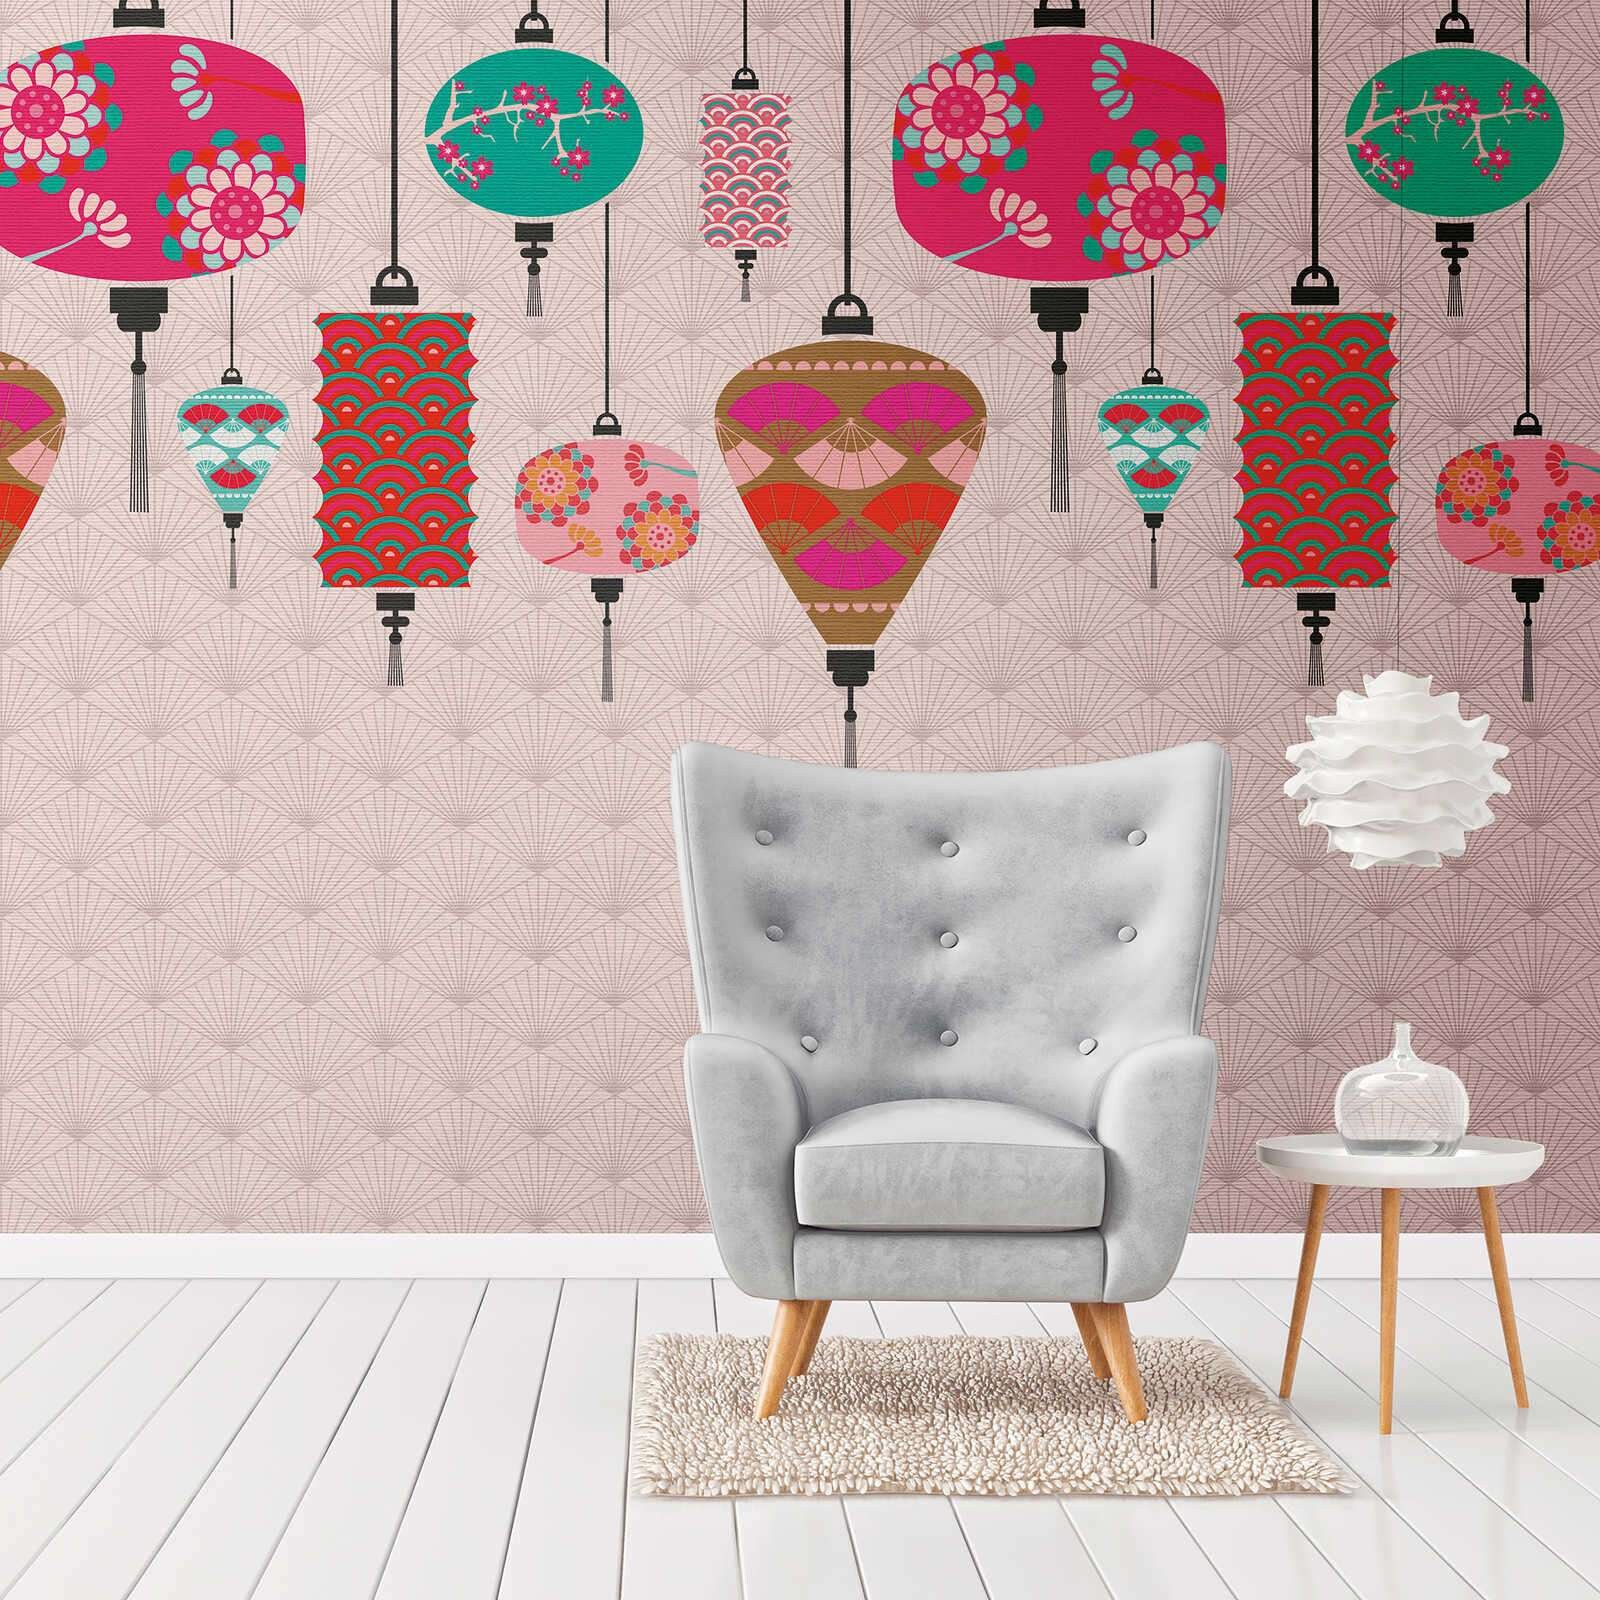 248-1 Asian Motif Wallpaper With Colorful Lanterns - Etsy